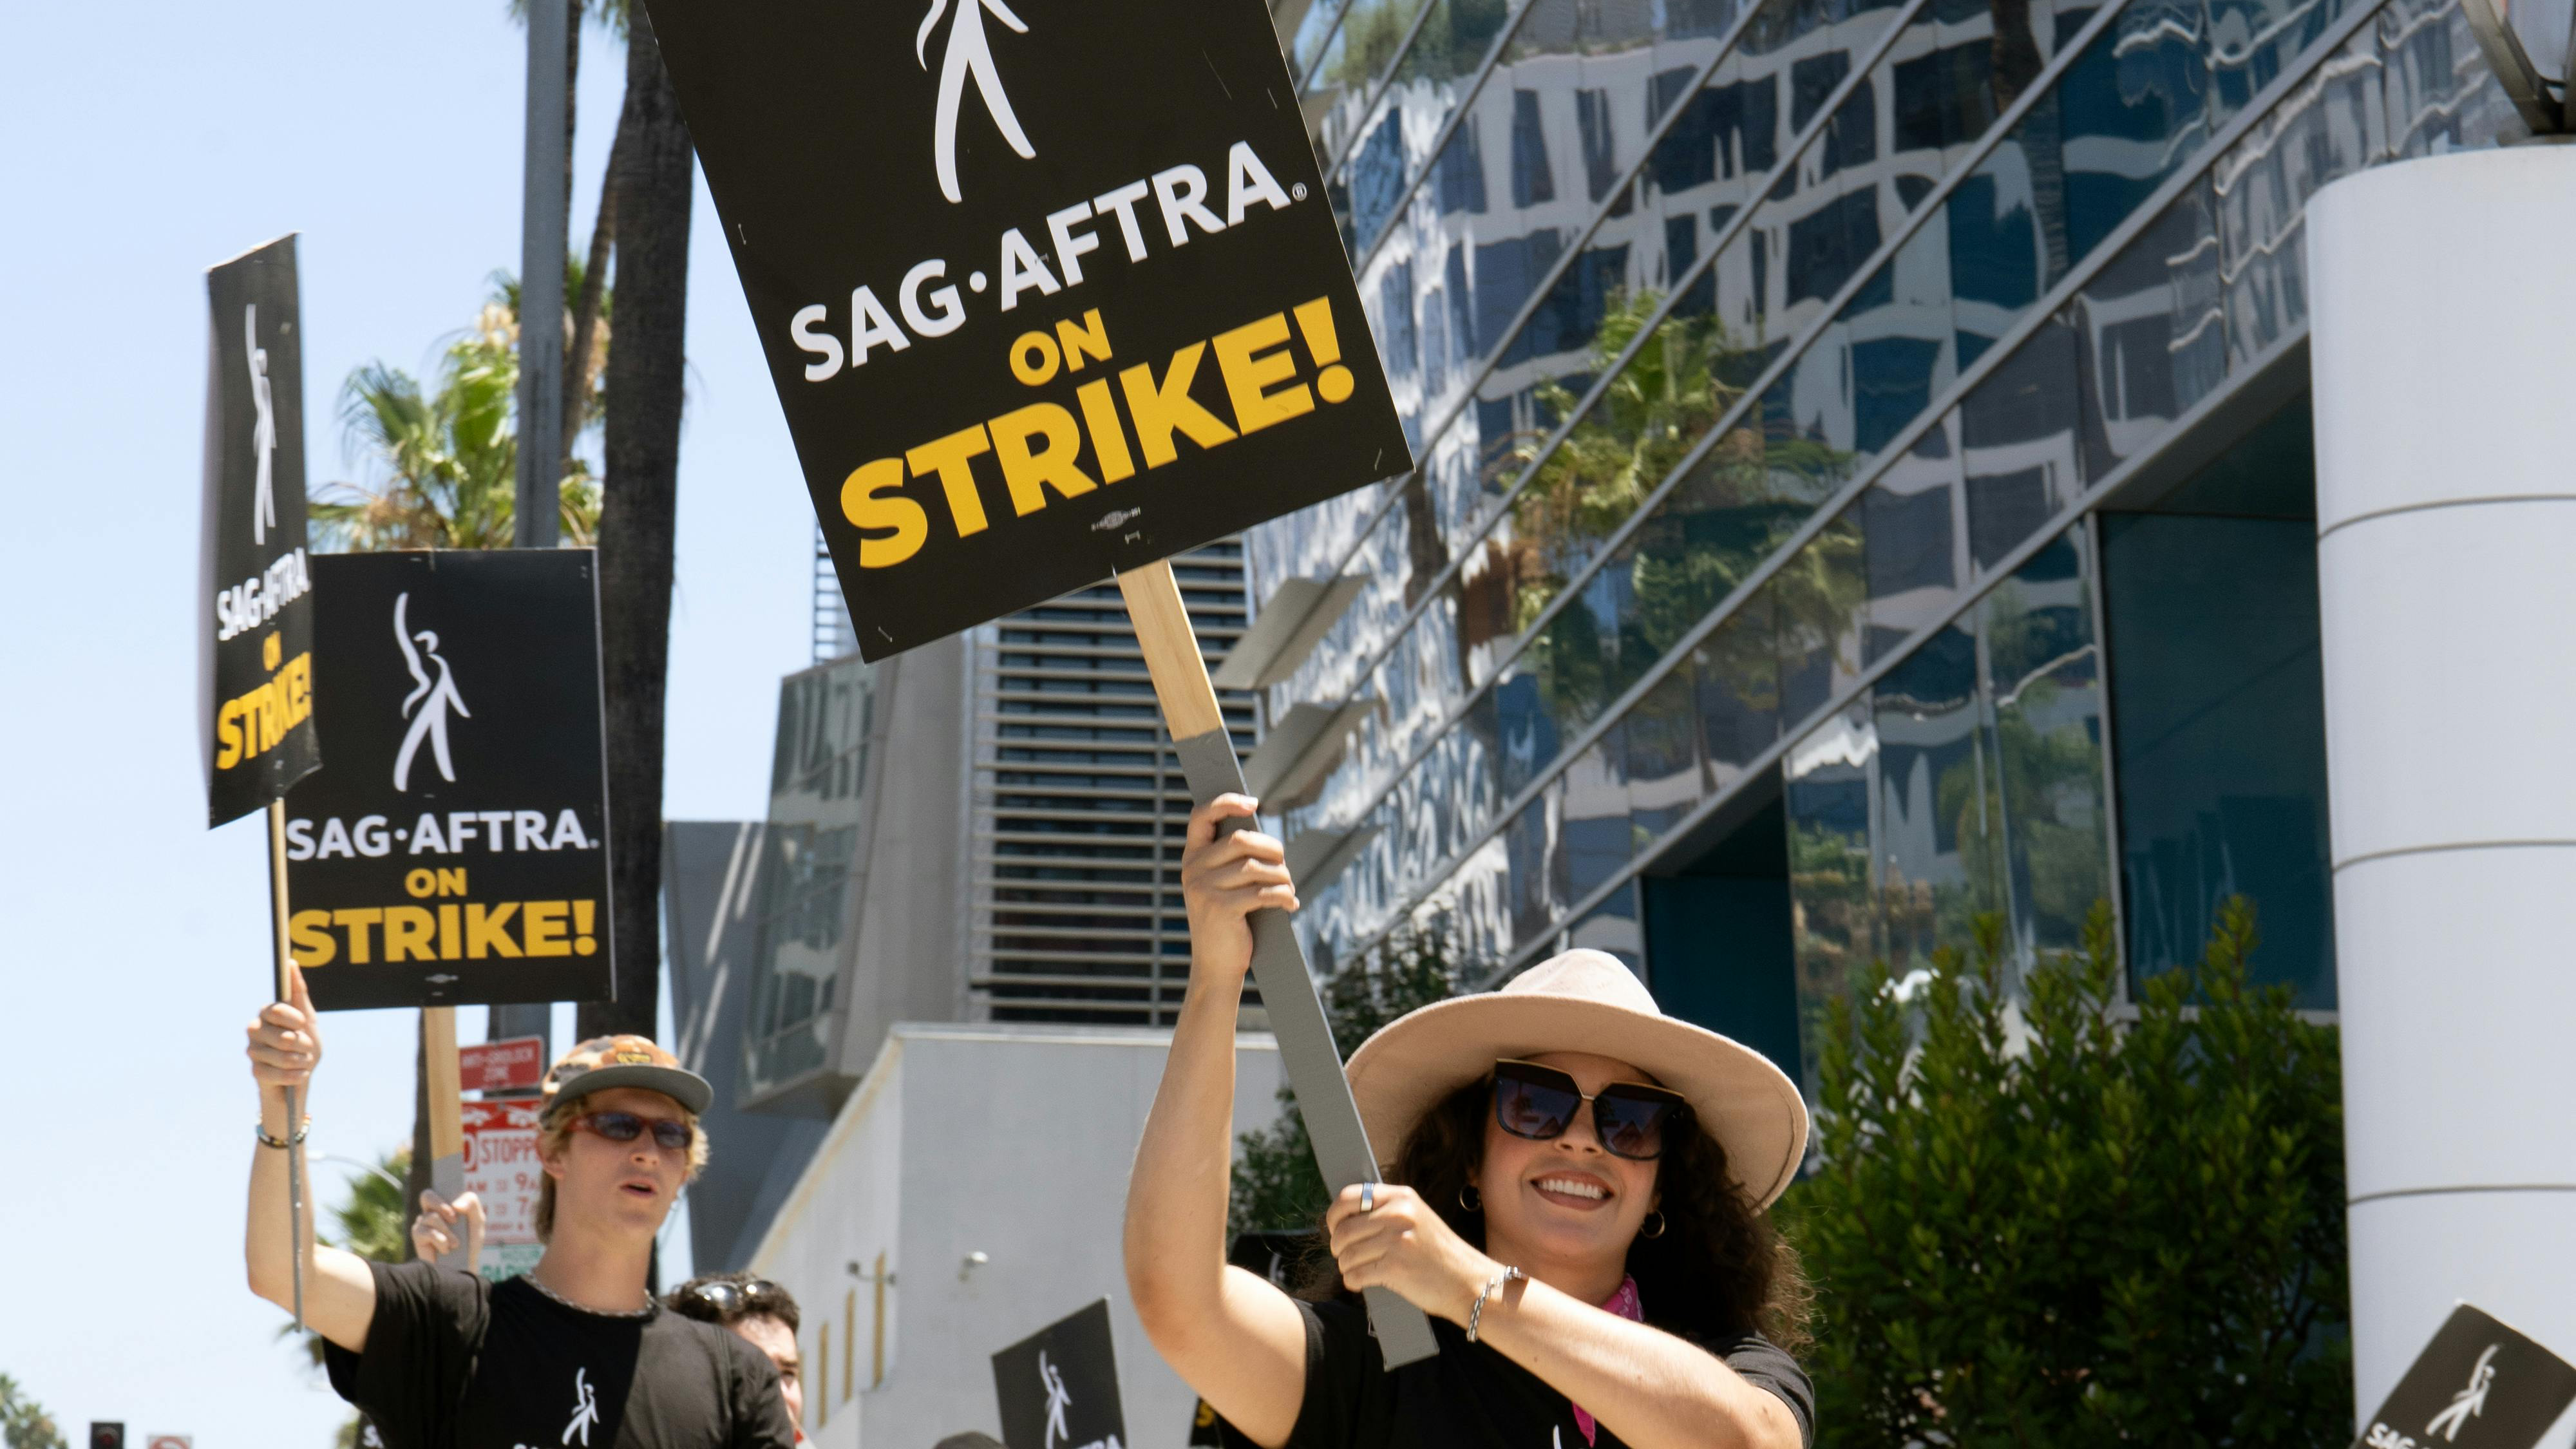 End of strike in Hollywood: SAG-AFTRA reaches agreement